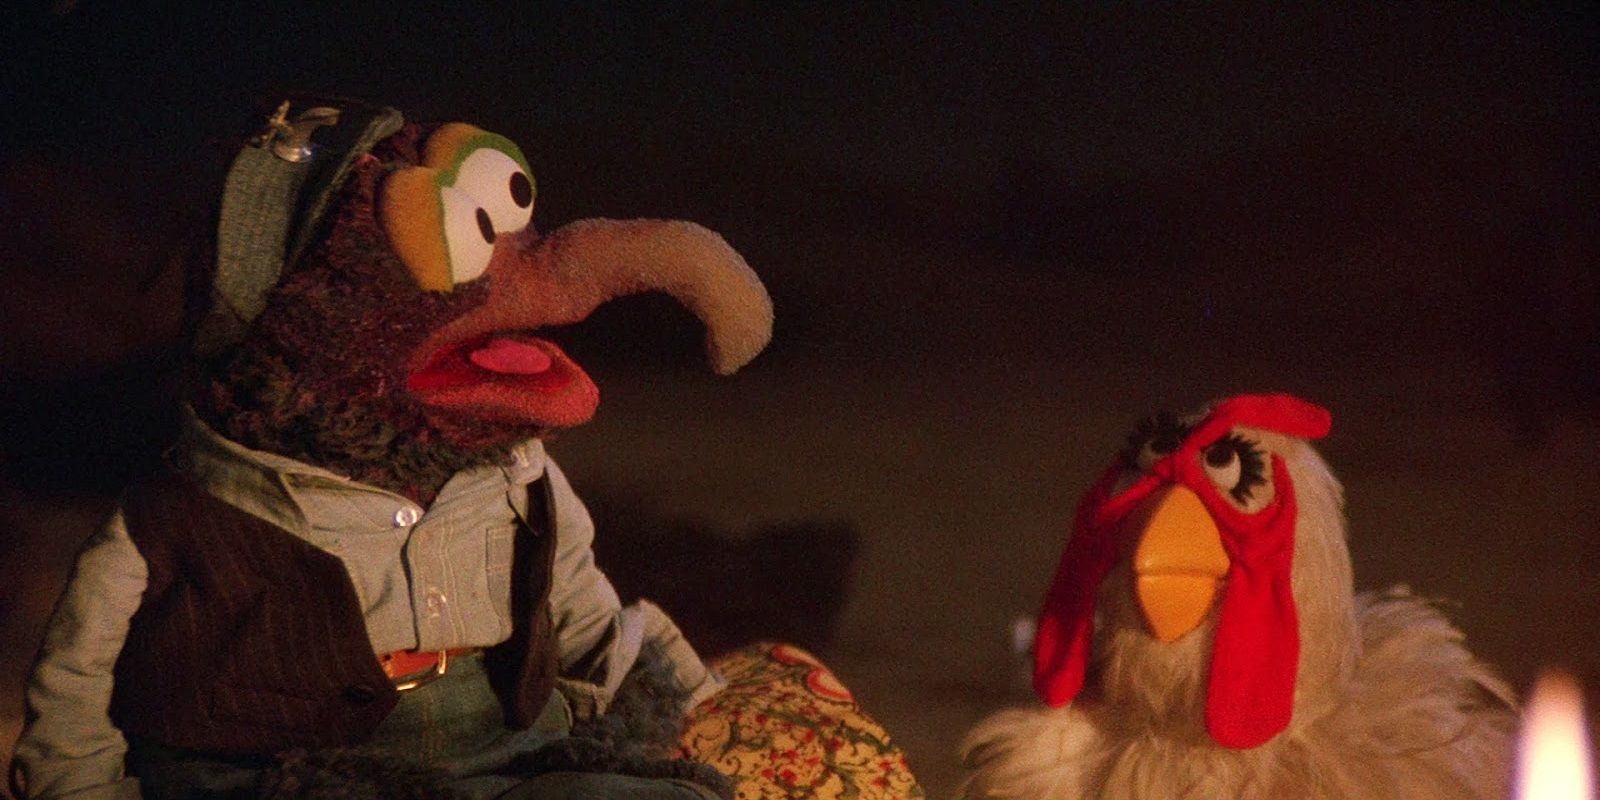 10 Of The Most Iconic Jim Henson Muppets Ranked